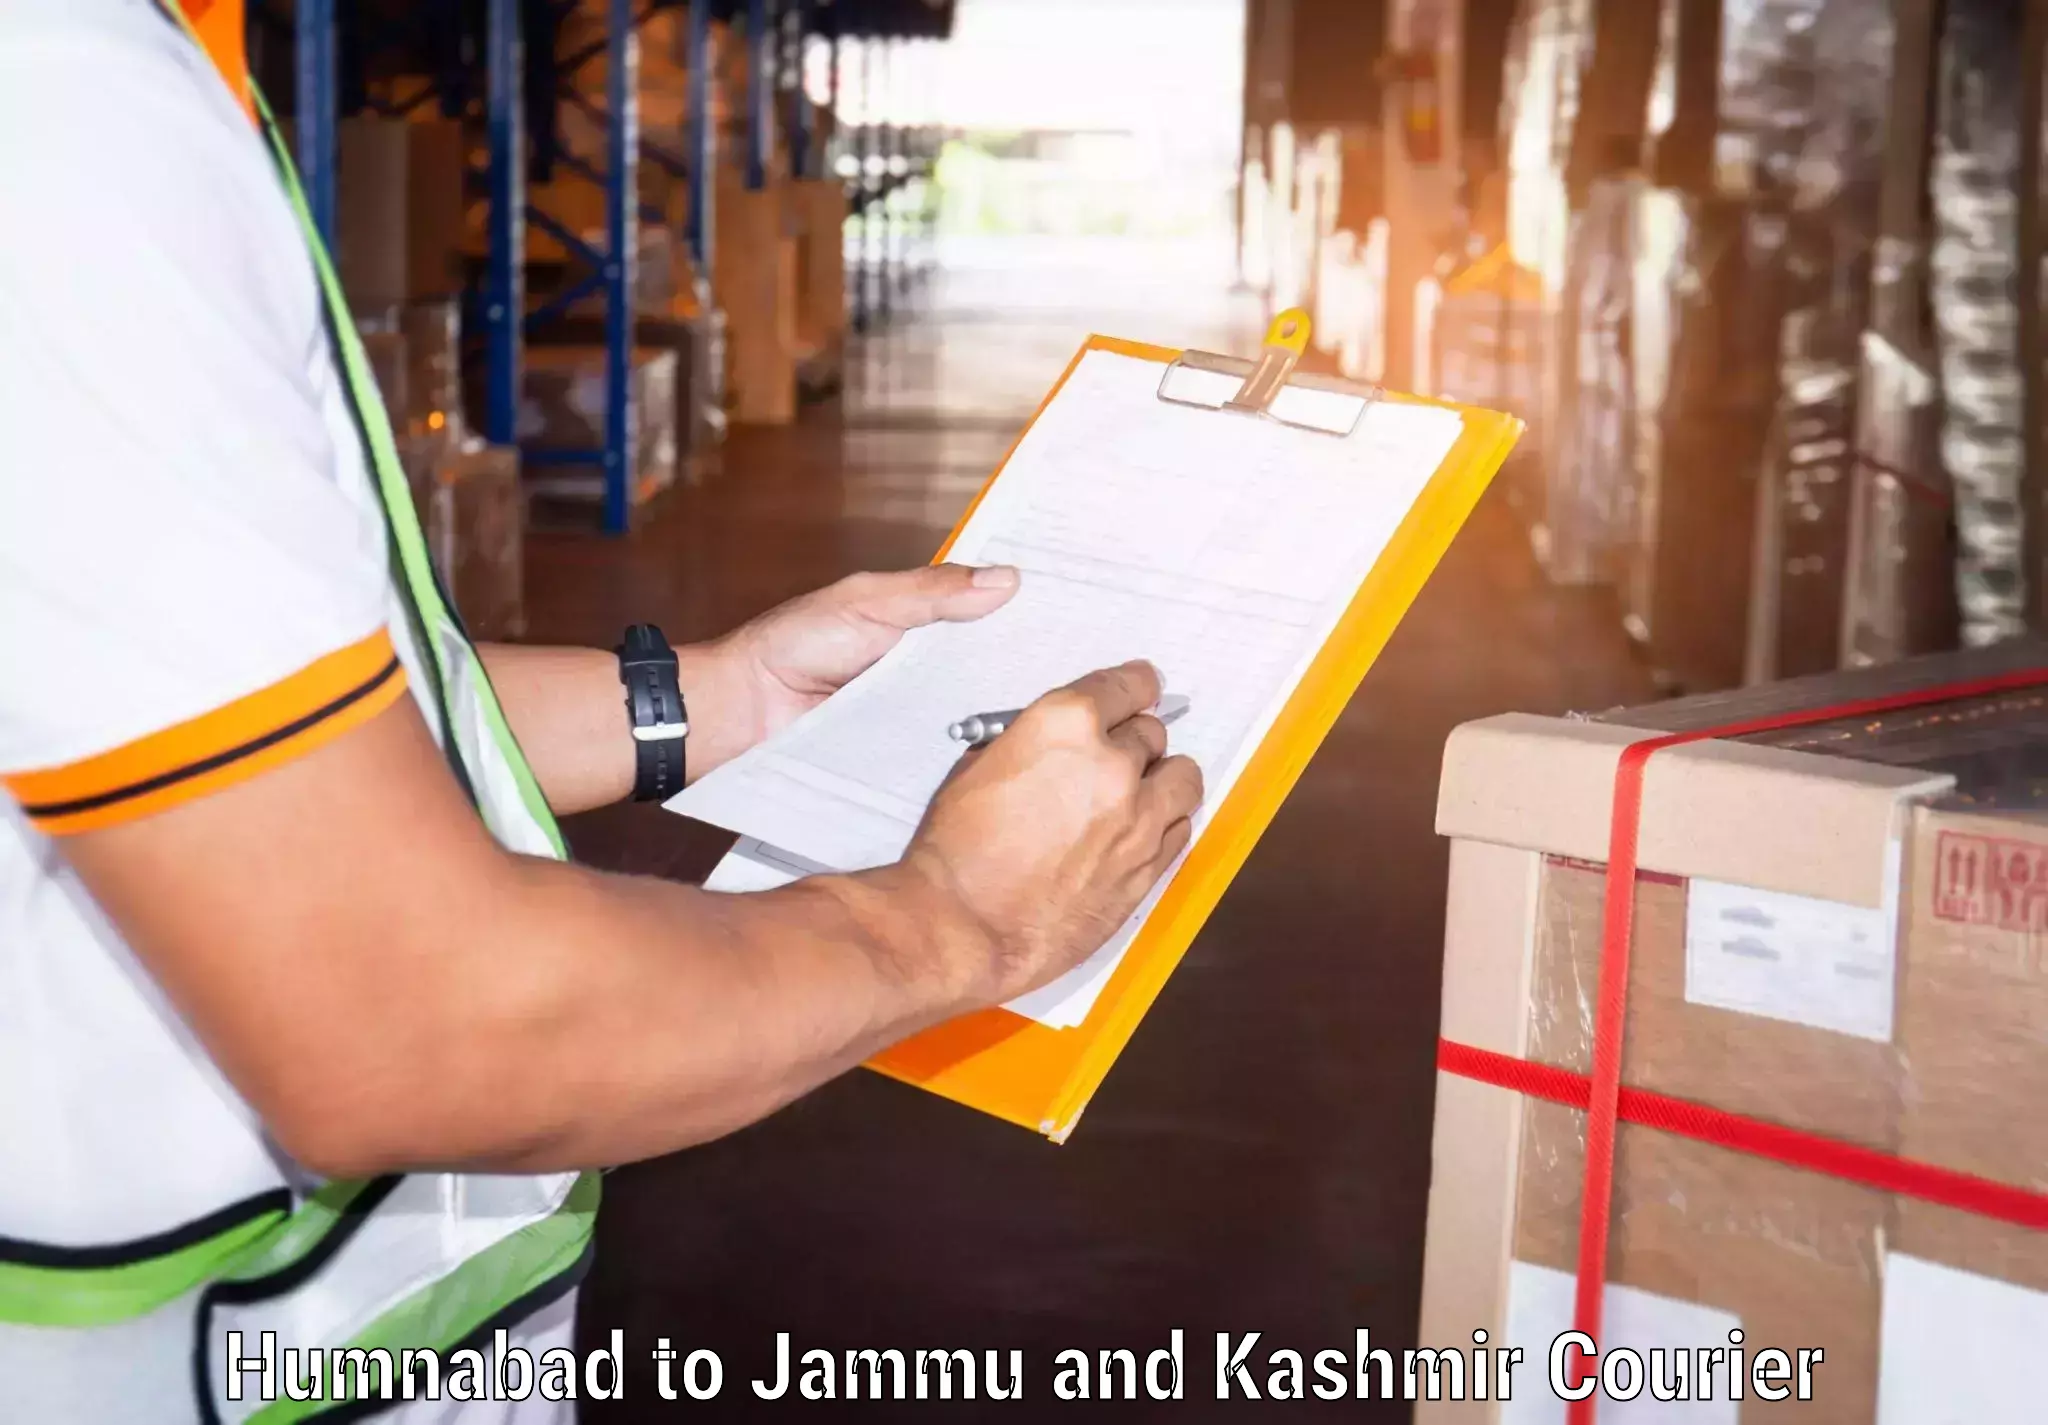 Personalized courier experiences Humnabad to Jammu and Kashmir